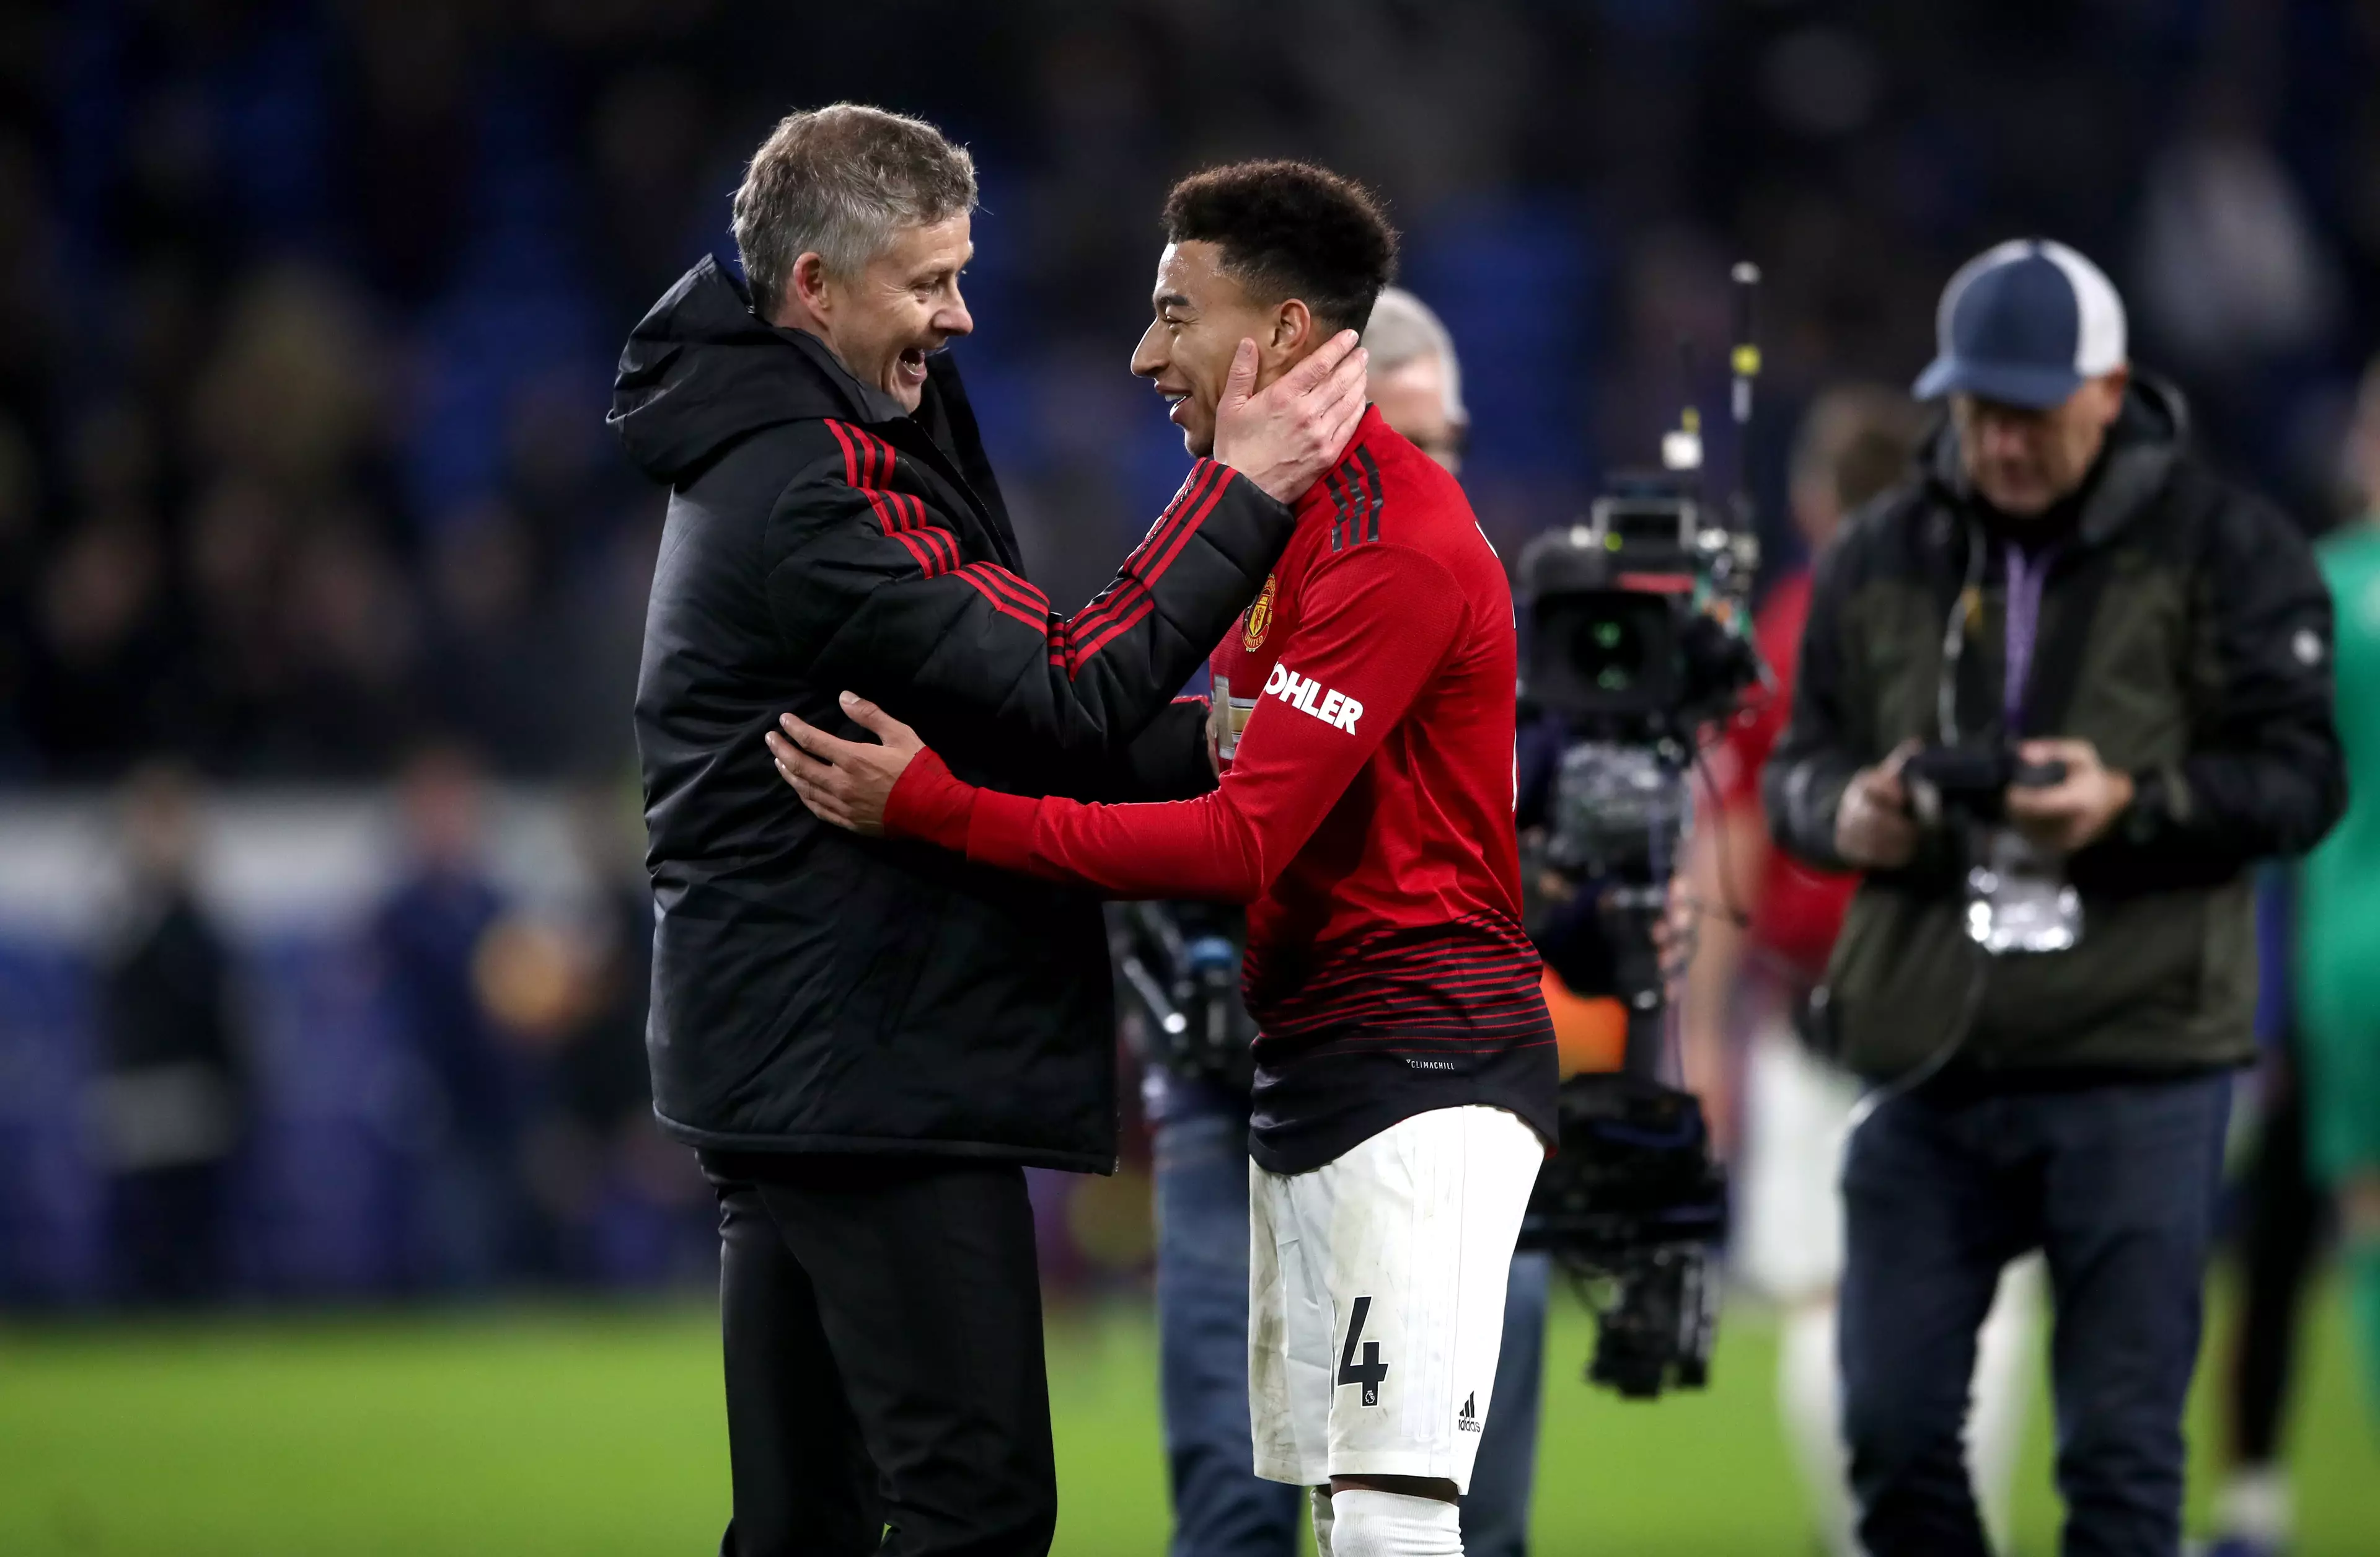 Lingard scored twice from the right on Saturday. Image: PA Images